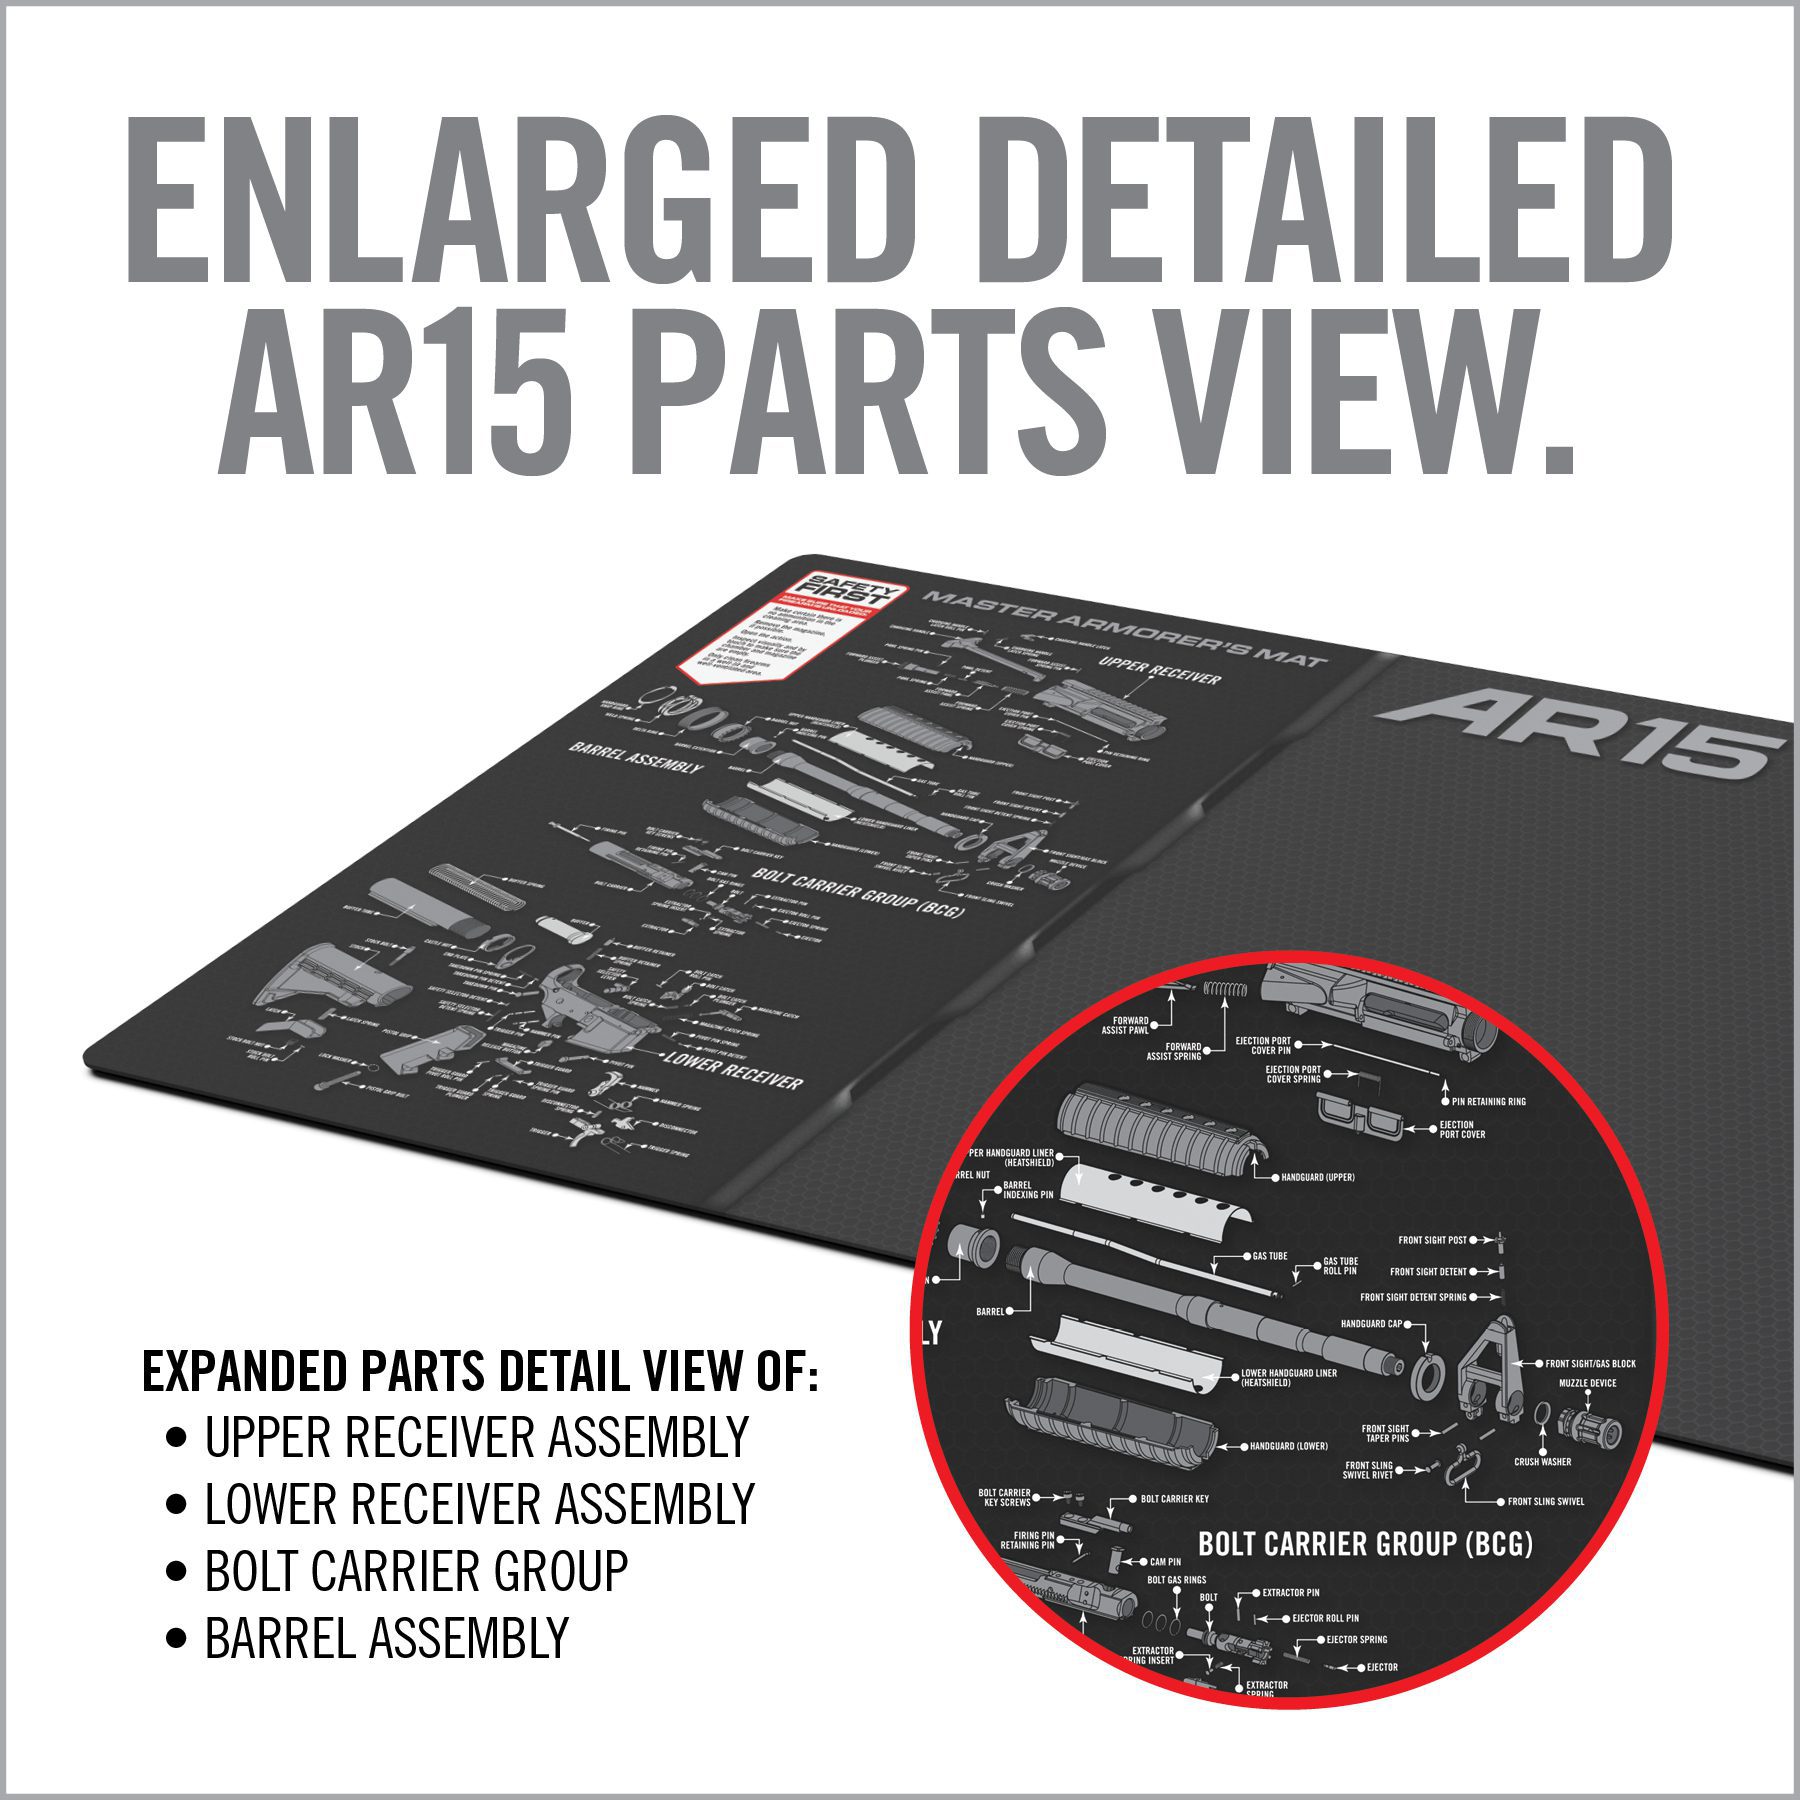 an advertisement for the ar - 15 rifle parts catalog